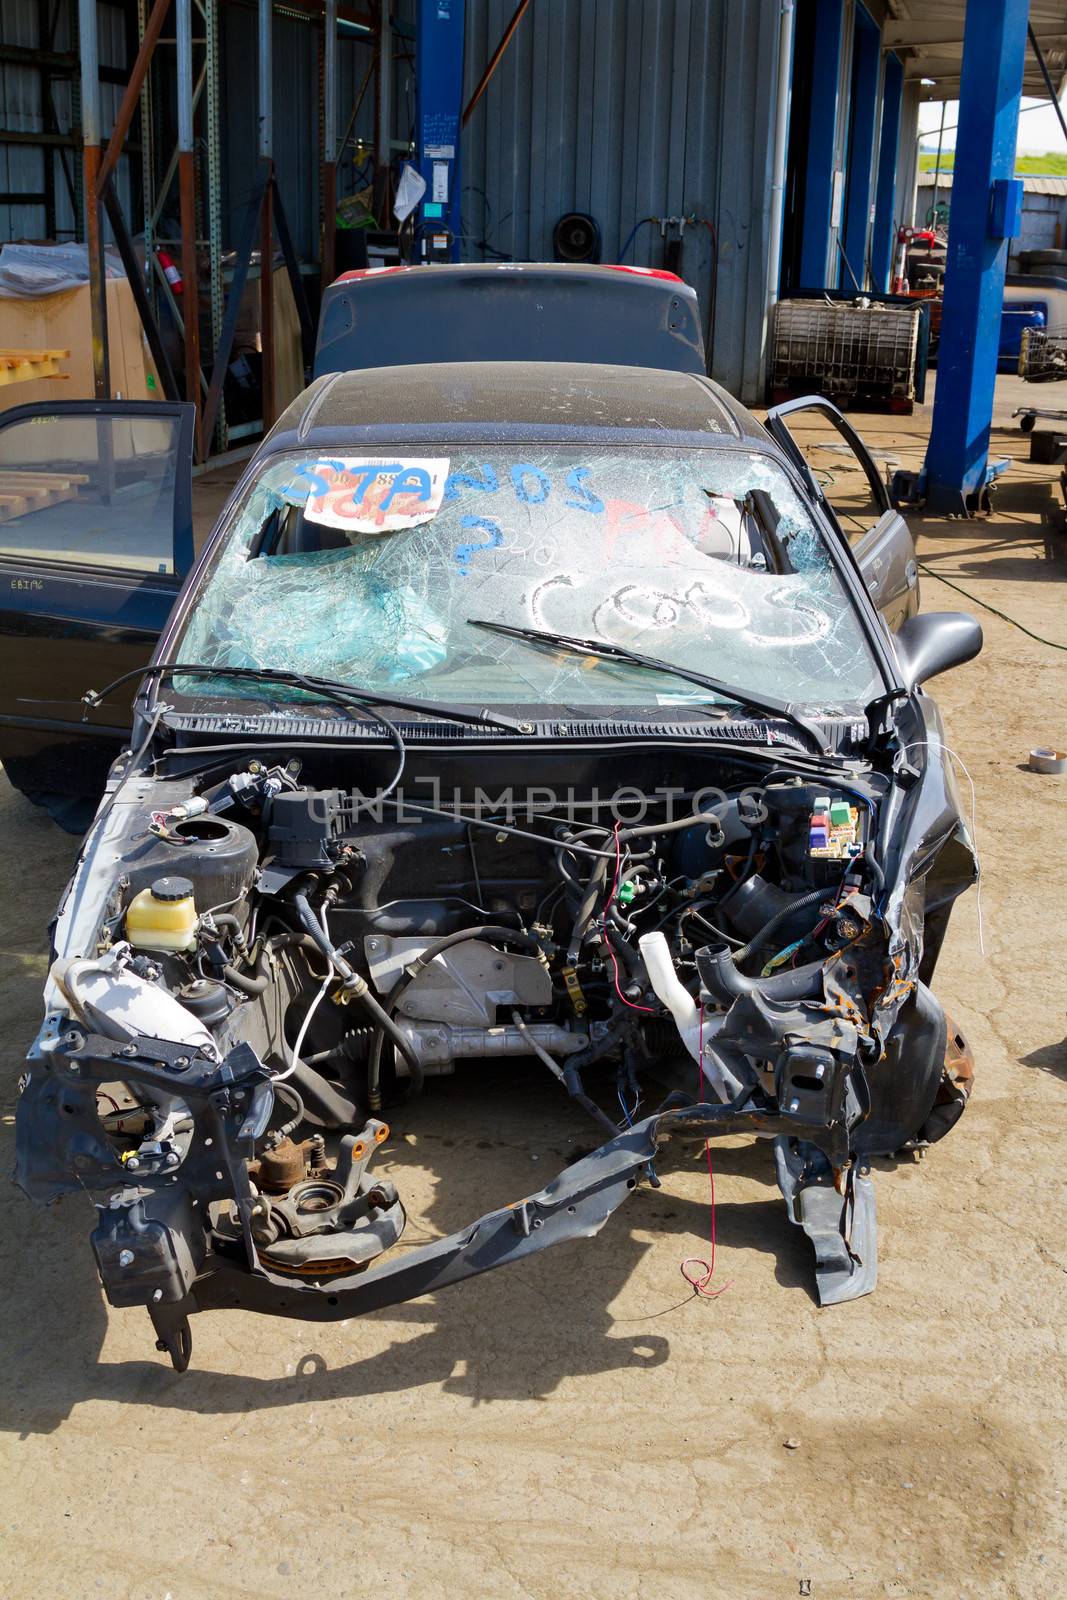 Detail of a vehicle at the auto salvage yard after a major accident collision.